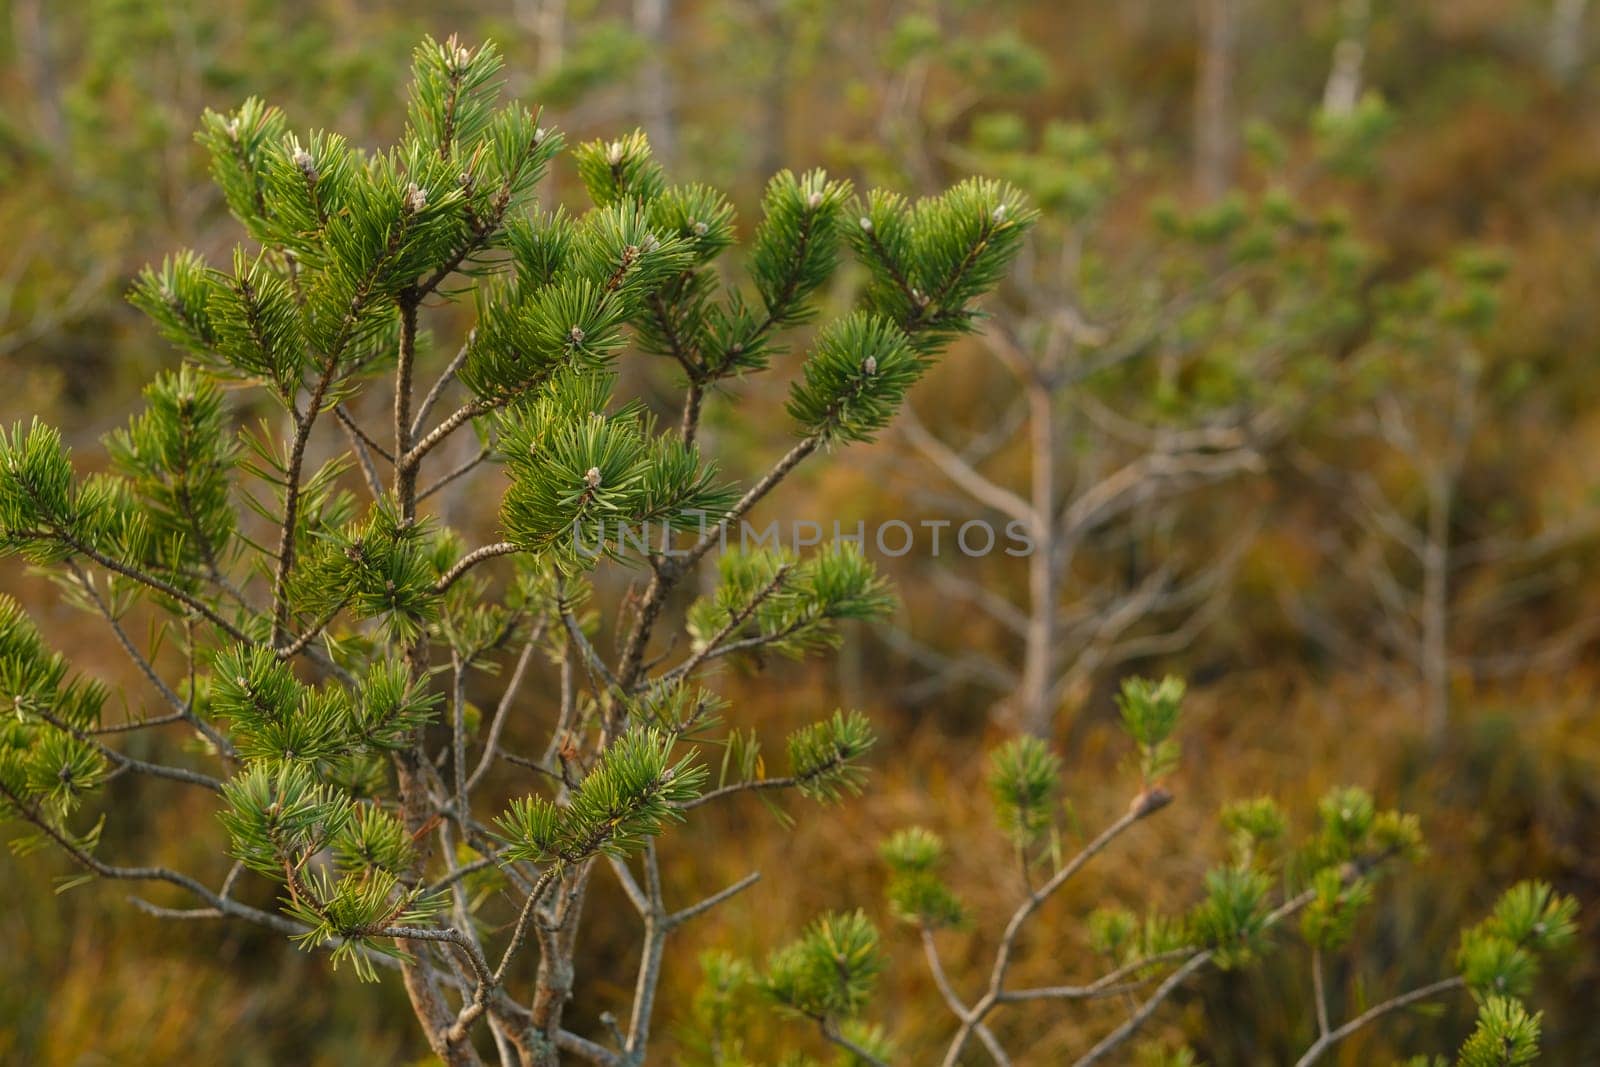 Spruce branches in the swamp in the Yelninsky Nature Reserve, Belarus, Ecosystems environmental problems climate change.